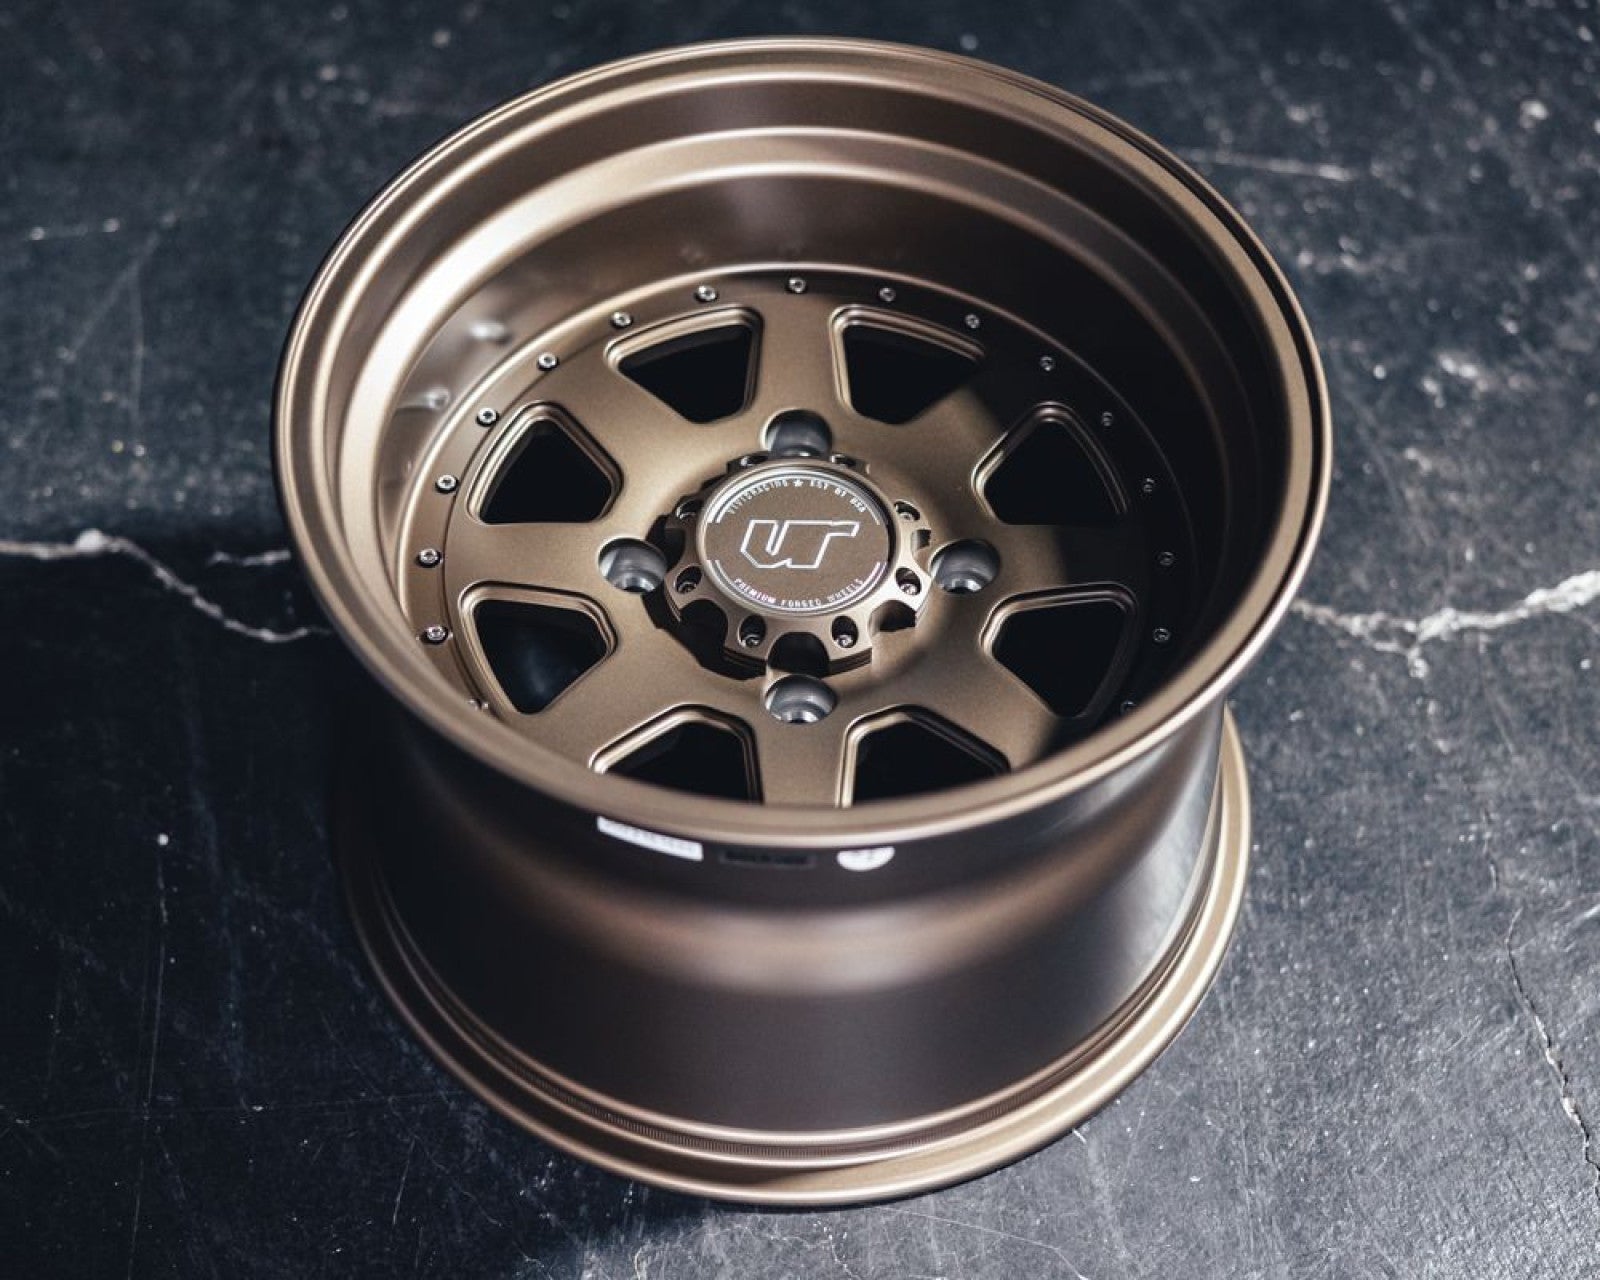 VR Forged D15 Wheel Package for Dunes Polaris RZR 15x7 15x10 Satin Bronze